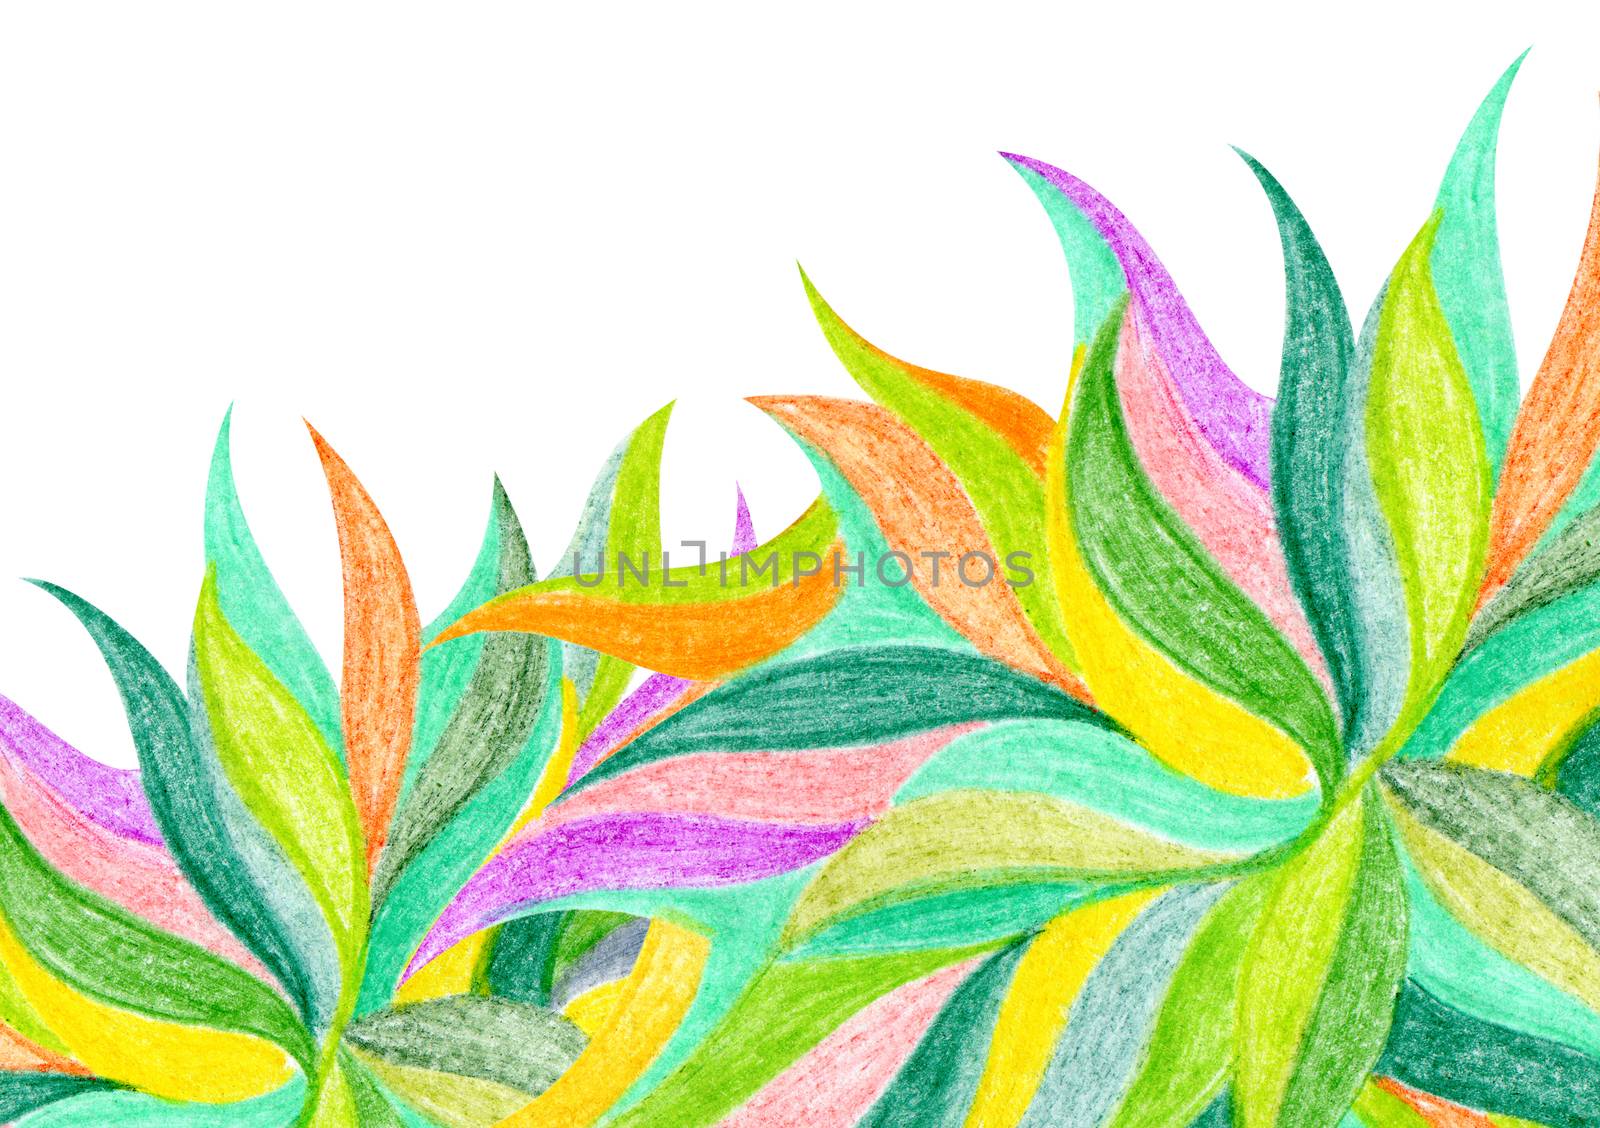 Abstract color pencil draw background by rudchenko